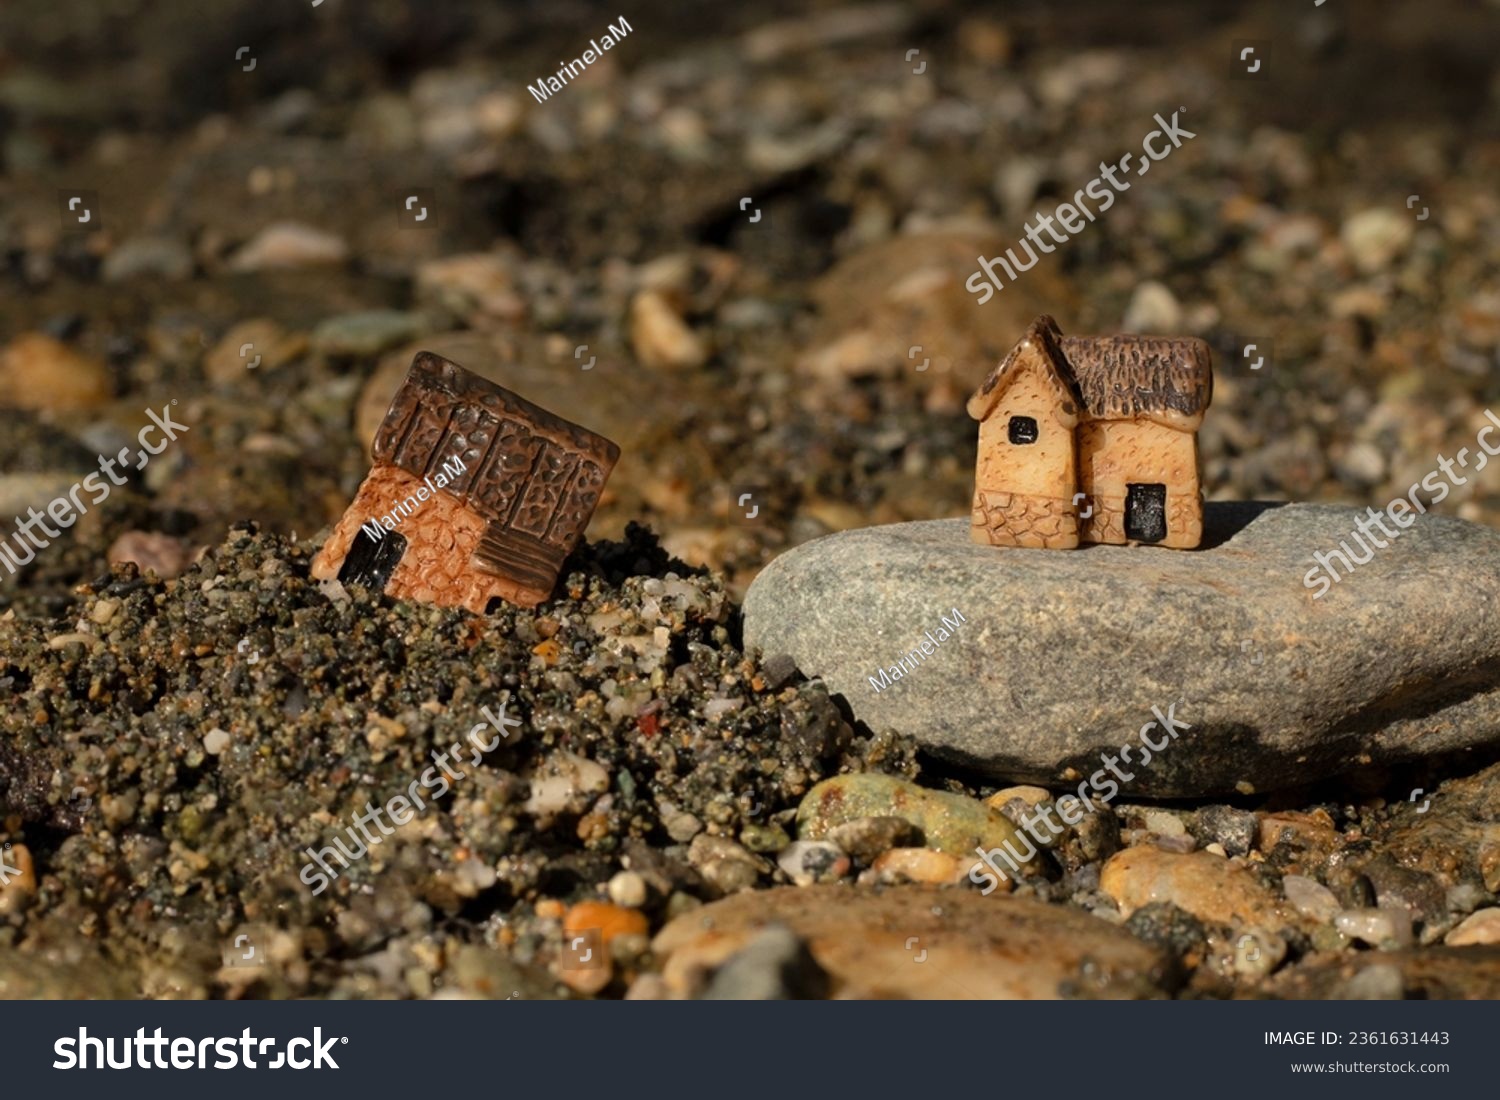 Two miniature houses in sand and on rock (stone). Close-up. Wise and solid foundation gospel parable of Jesus Christ, obedience, and faith in God. Christian biblical concept. #2361631443